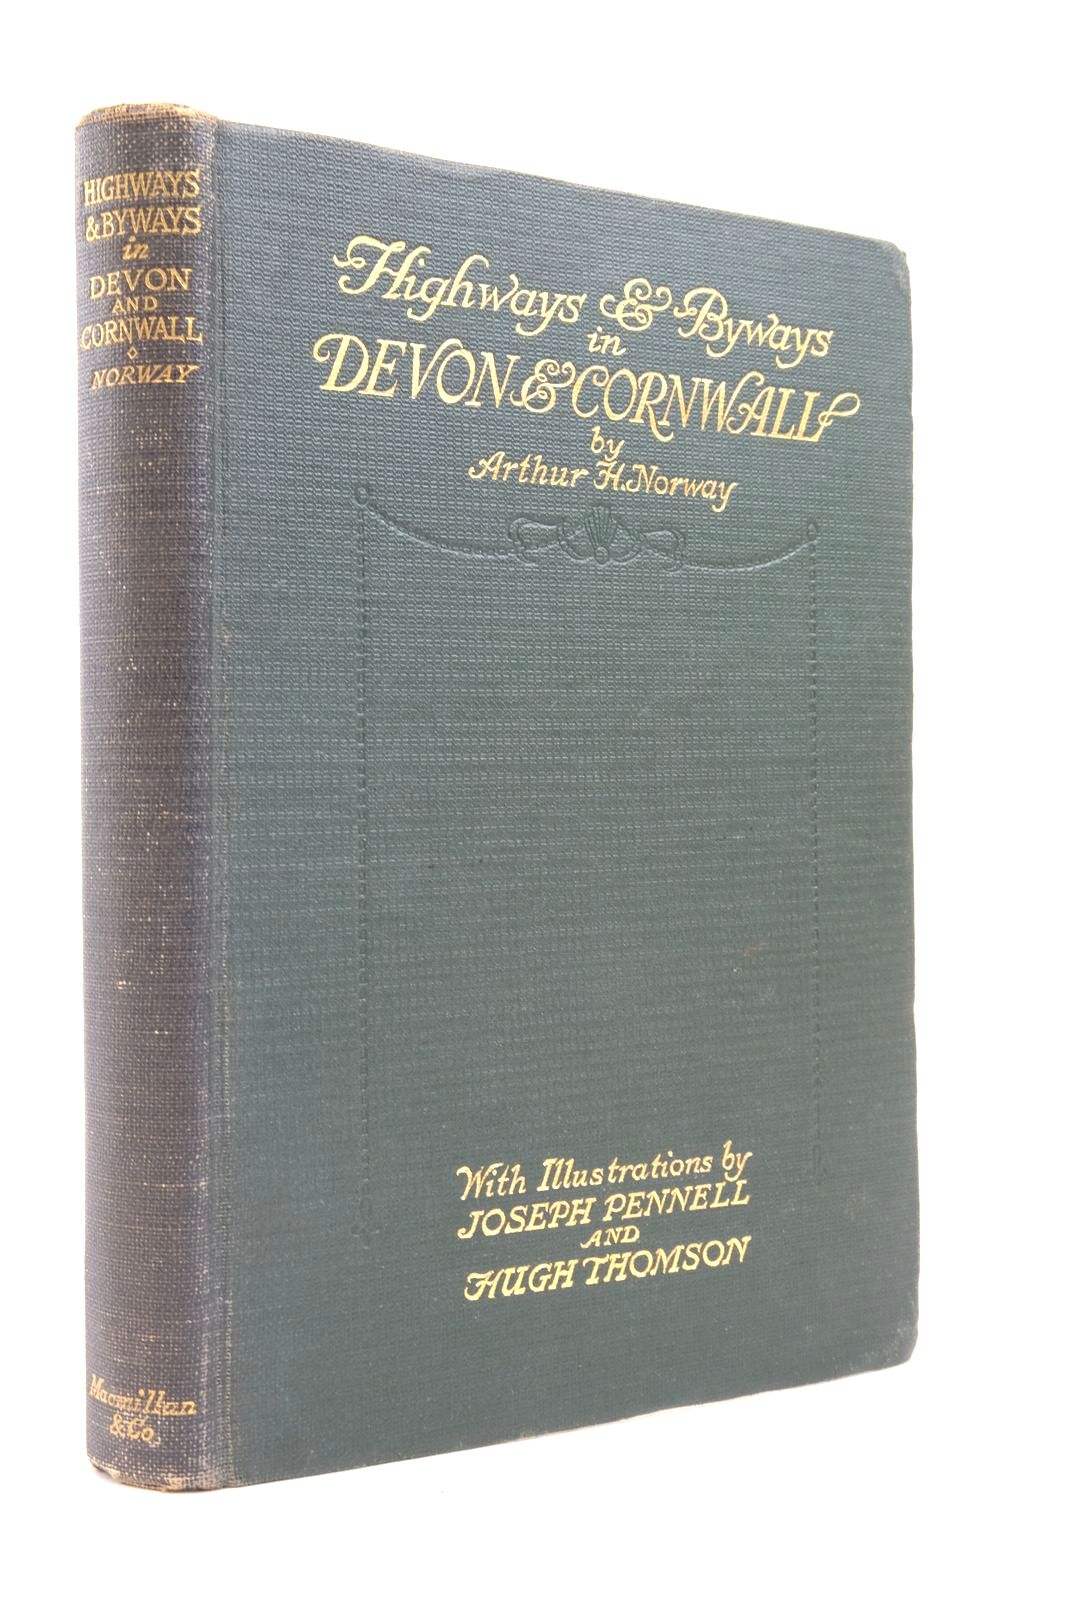 Photo of HIGHWAYS AND BYWAYS IN DEVON AND CORNWALL written by Norway, Arthur H. illustrated by Pennell, Joseph Thomson, Hugh published by Macmillan &amp; Co. Ltd. (STOCK CODE: 2137630)  for sale by Stella & Rose's Books